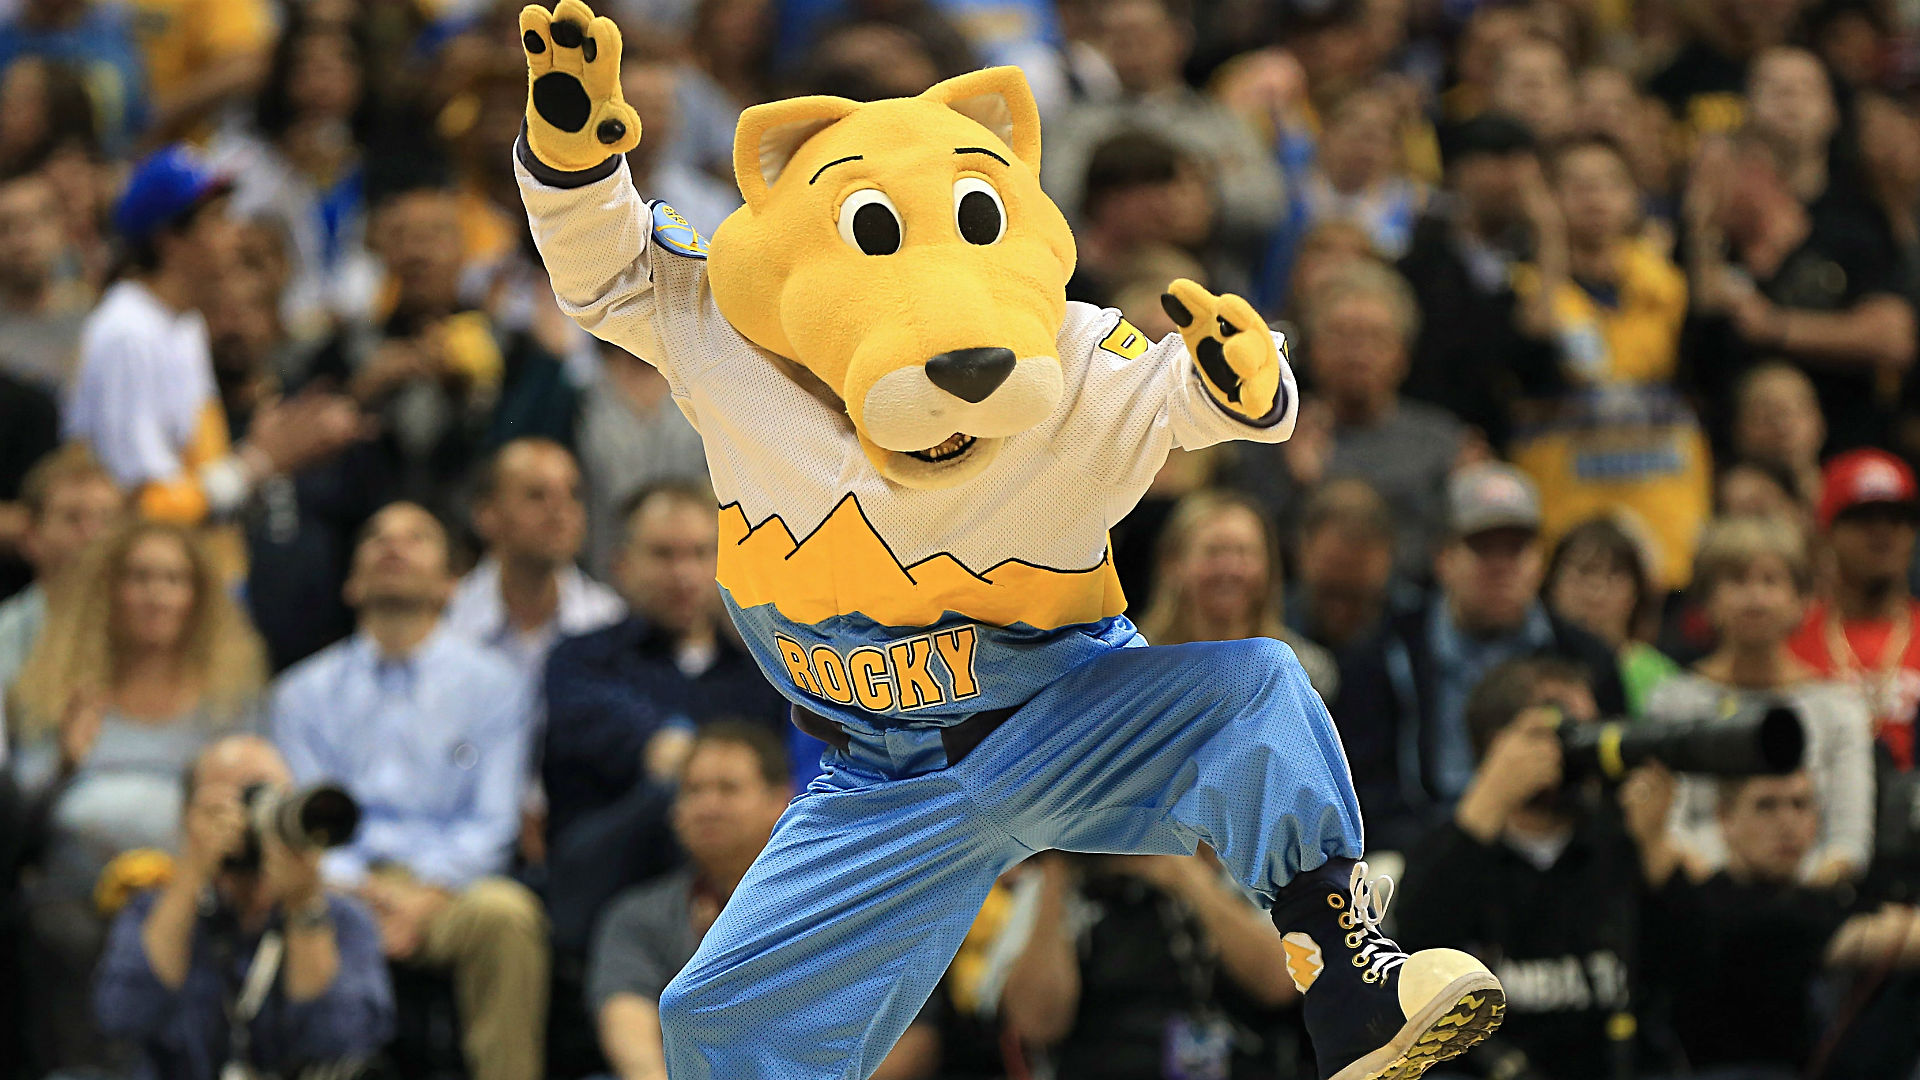 Russell Westbrook and the Nuggets' mascot have a blood feud NBA